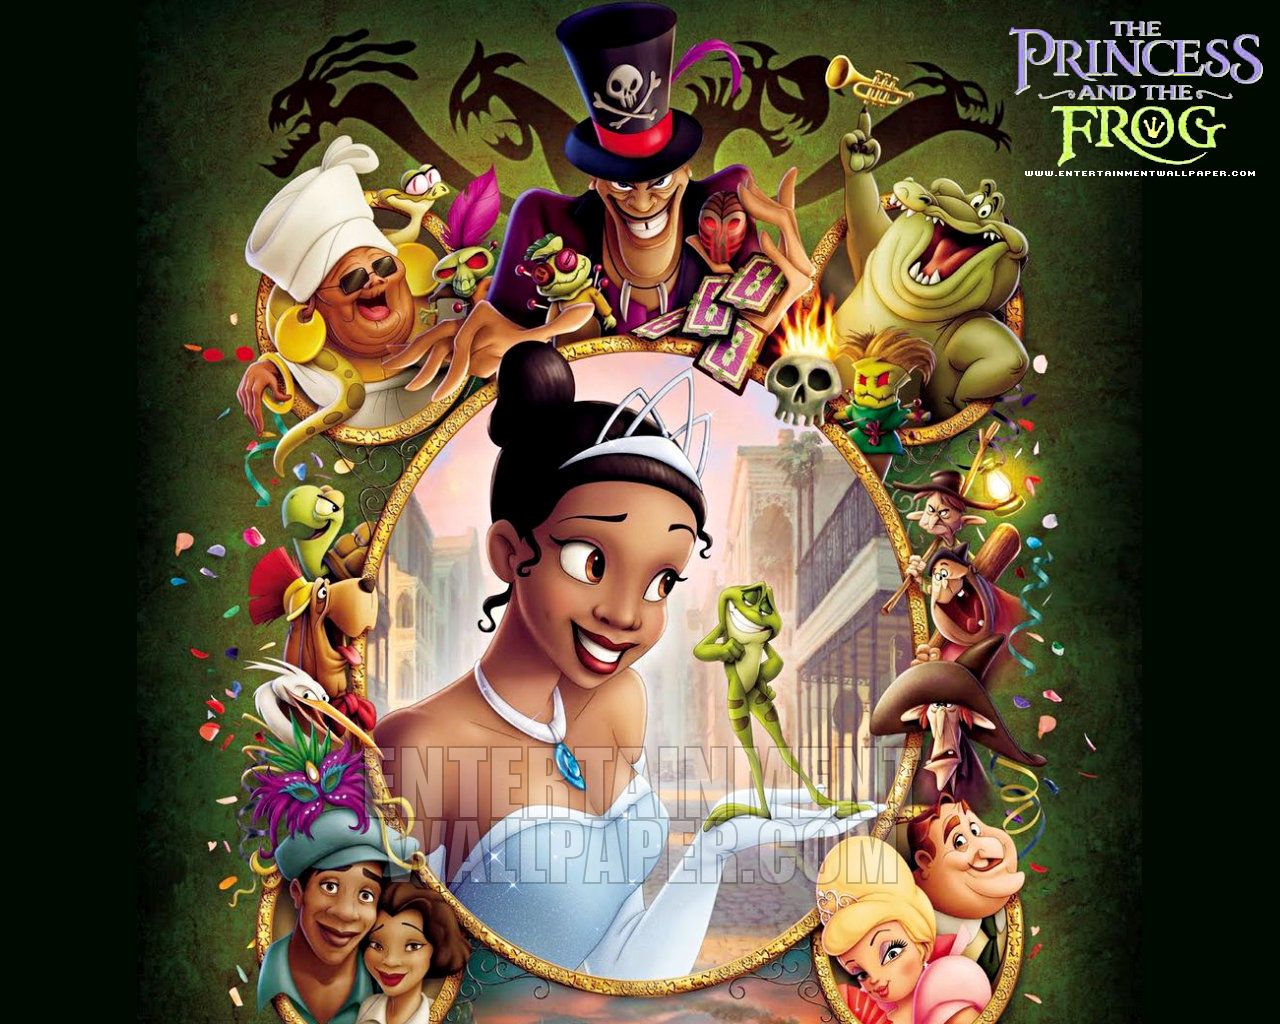 The Princess and the Frog Wallpaper - #10019664 (1280x1024 ...